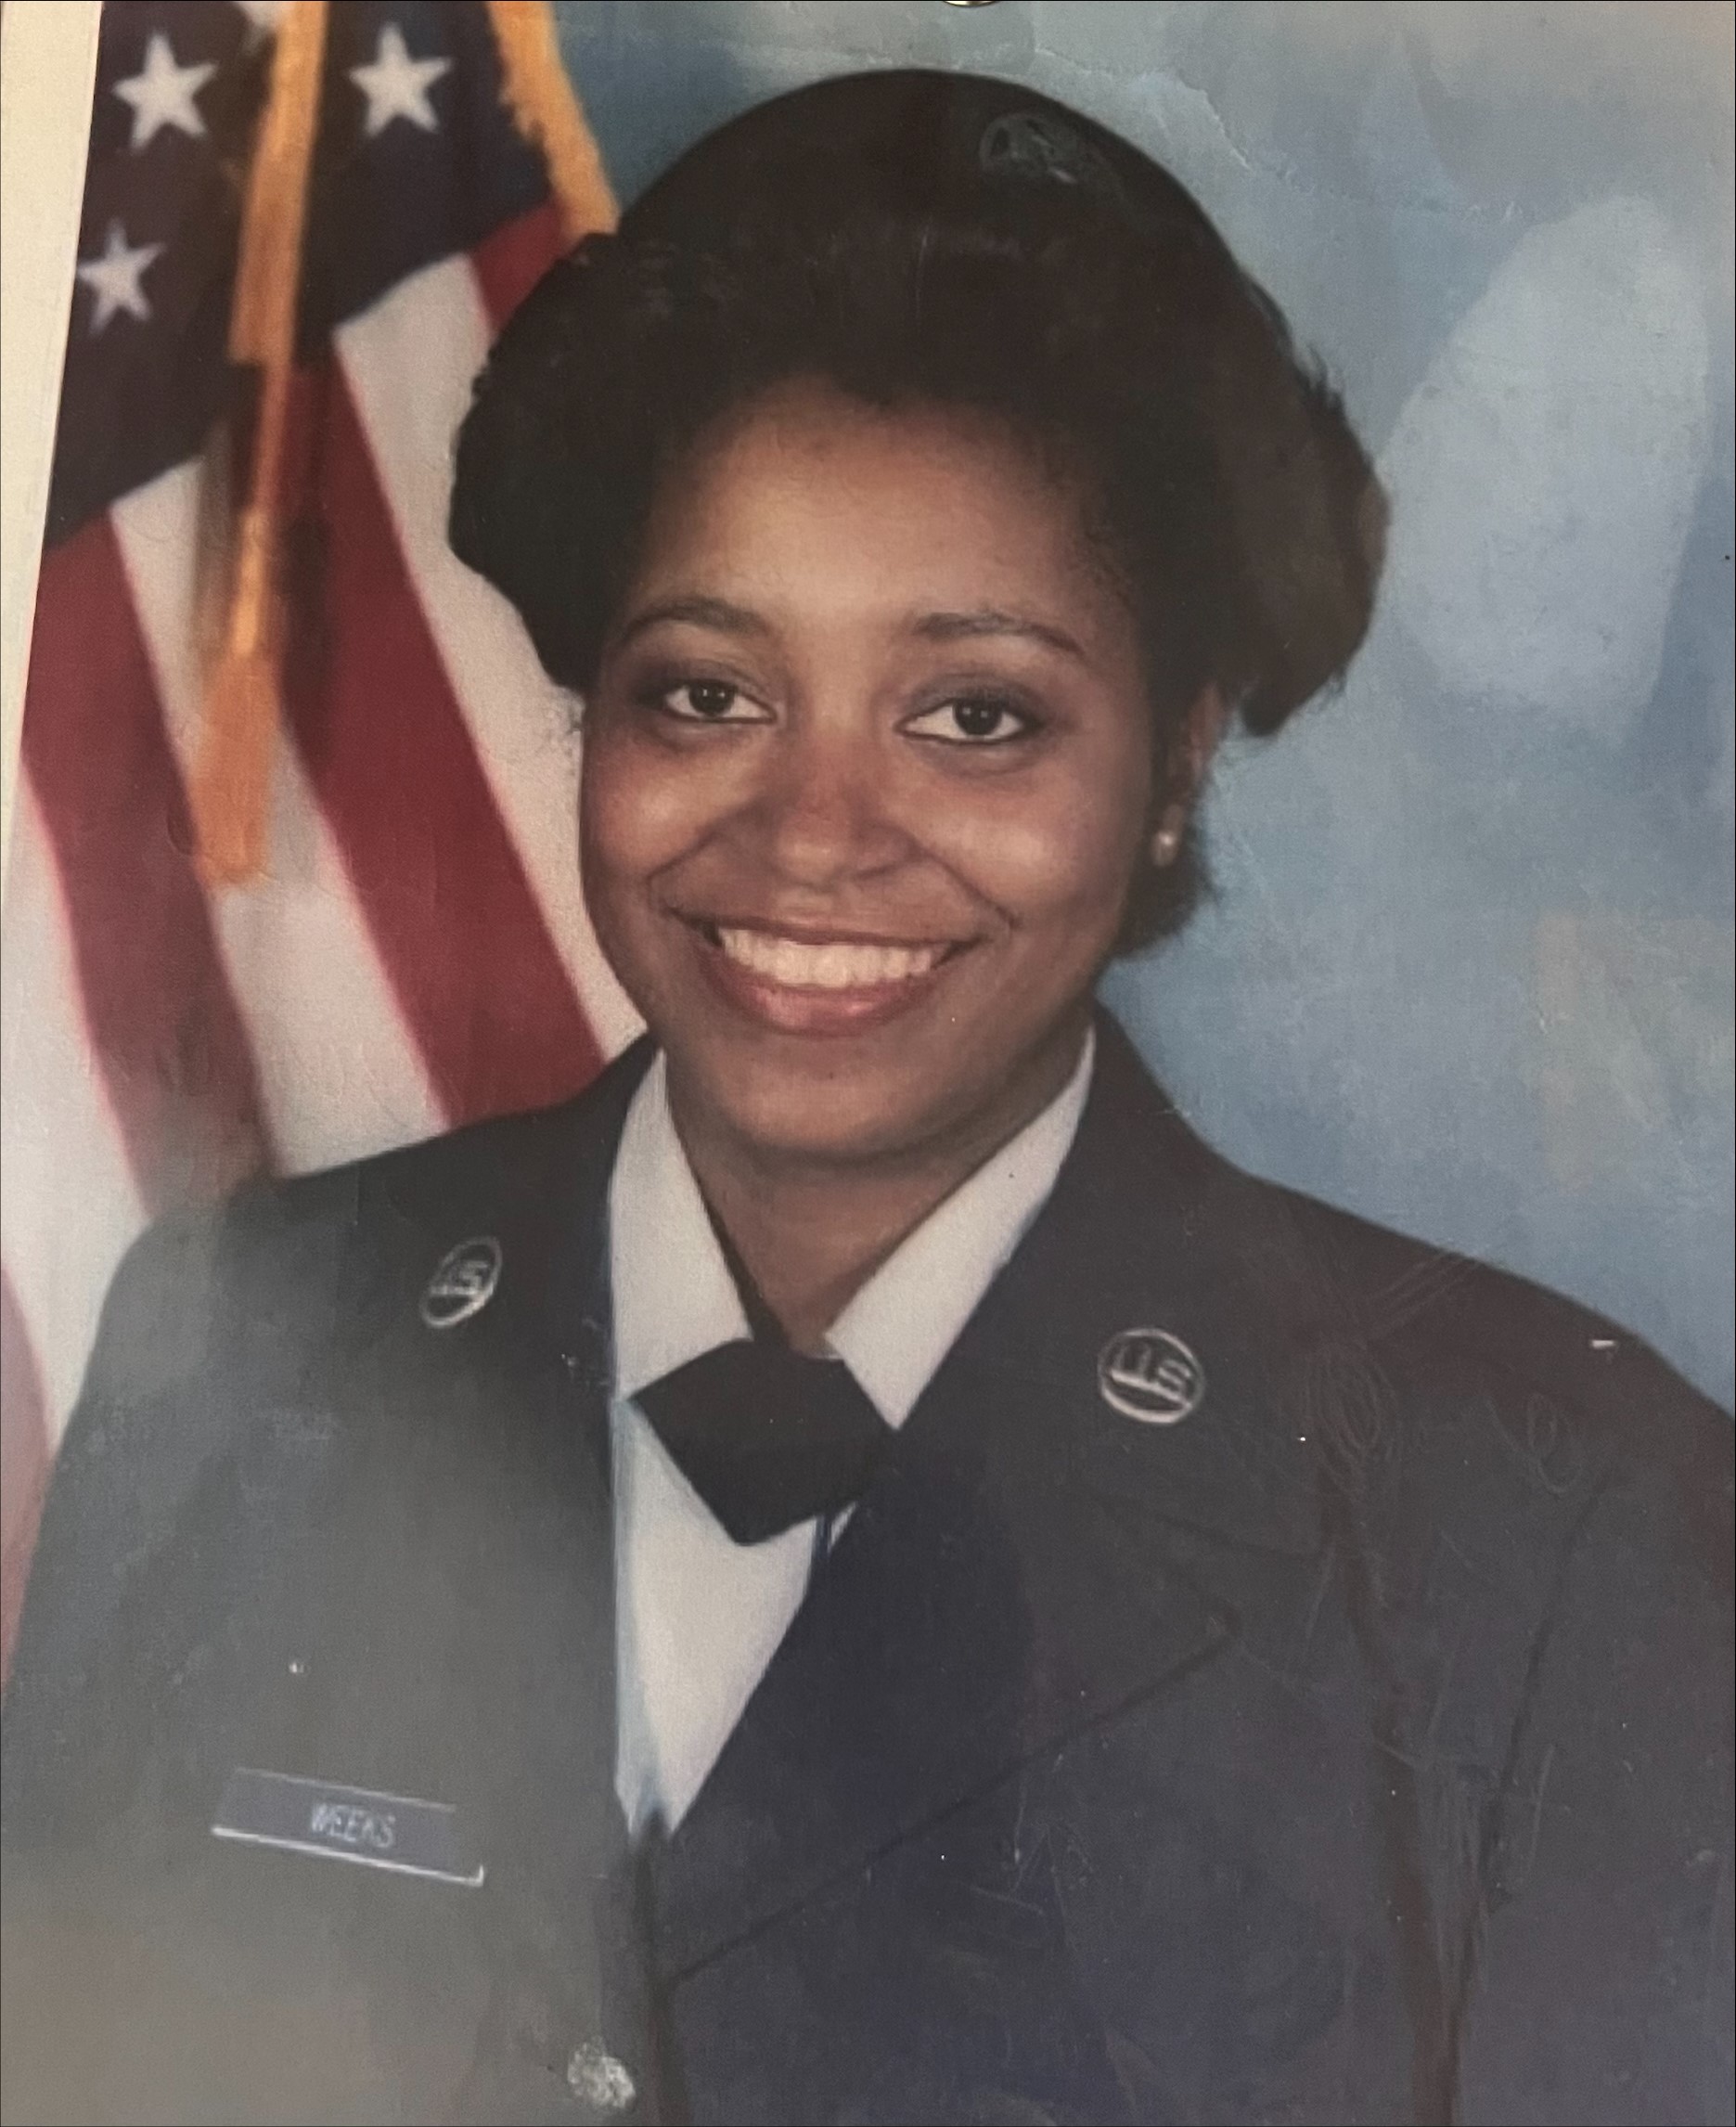 United States Air Force veteran continues career in healthcare with degree from Keiser University Online